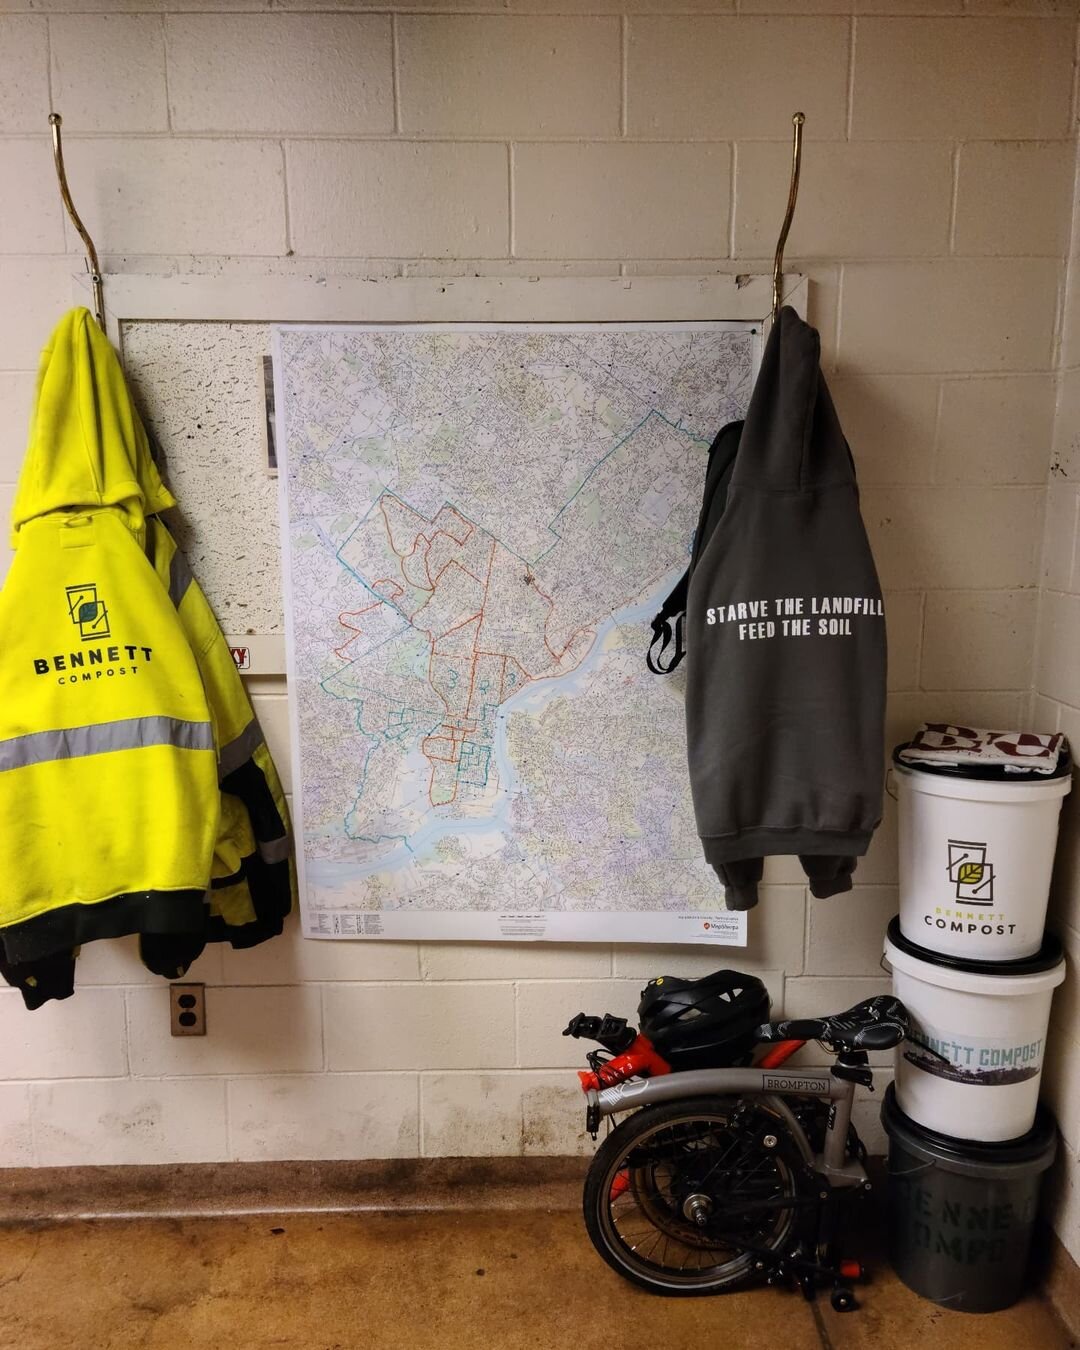 What we do, all wrapped up into one pic:⬇️
.
Three buckets from over a decade of evolution, a fold up bike for daily travel to and from our spot on Rising Sun Ave., our bike routes maps, a hi-vis hoodie for the road, and one for the office with our m